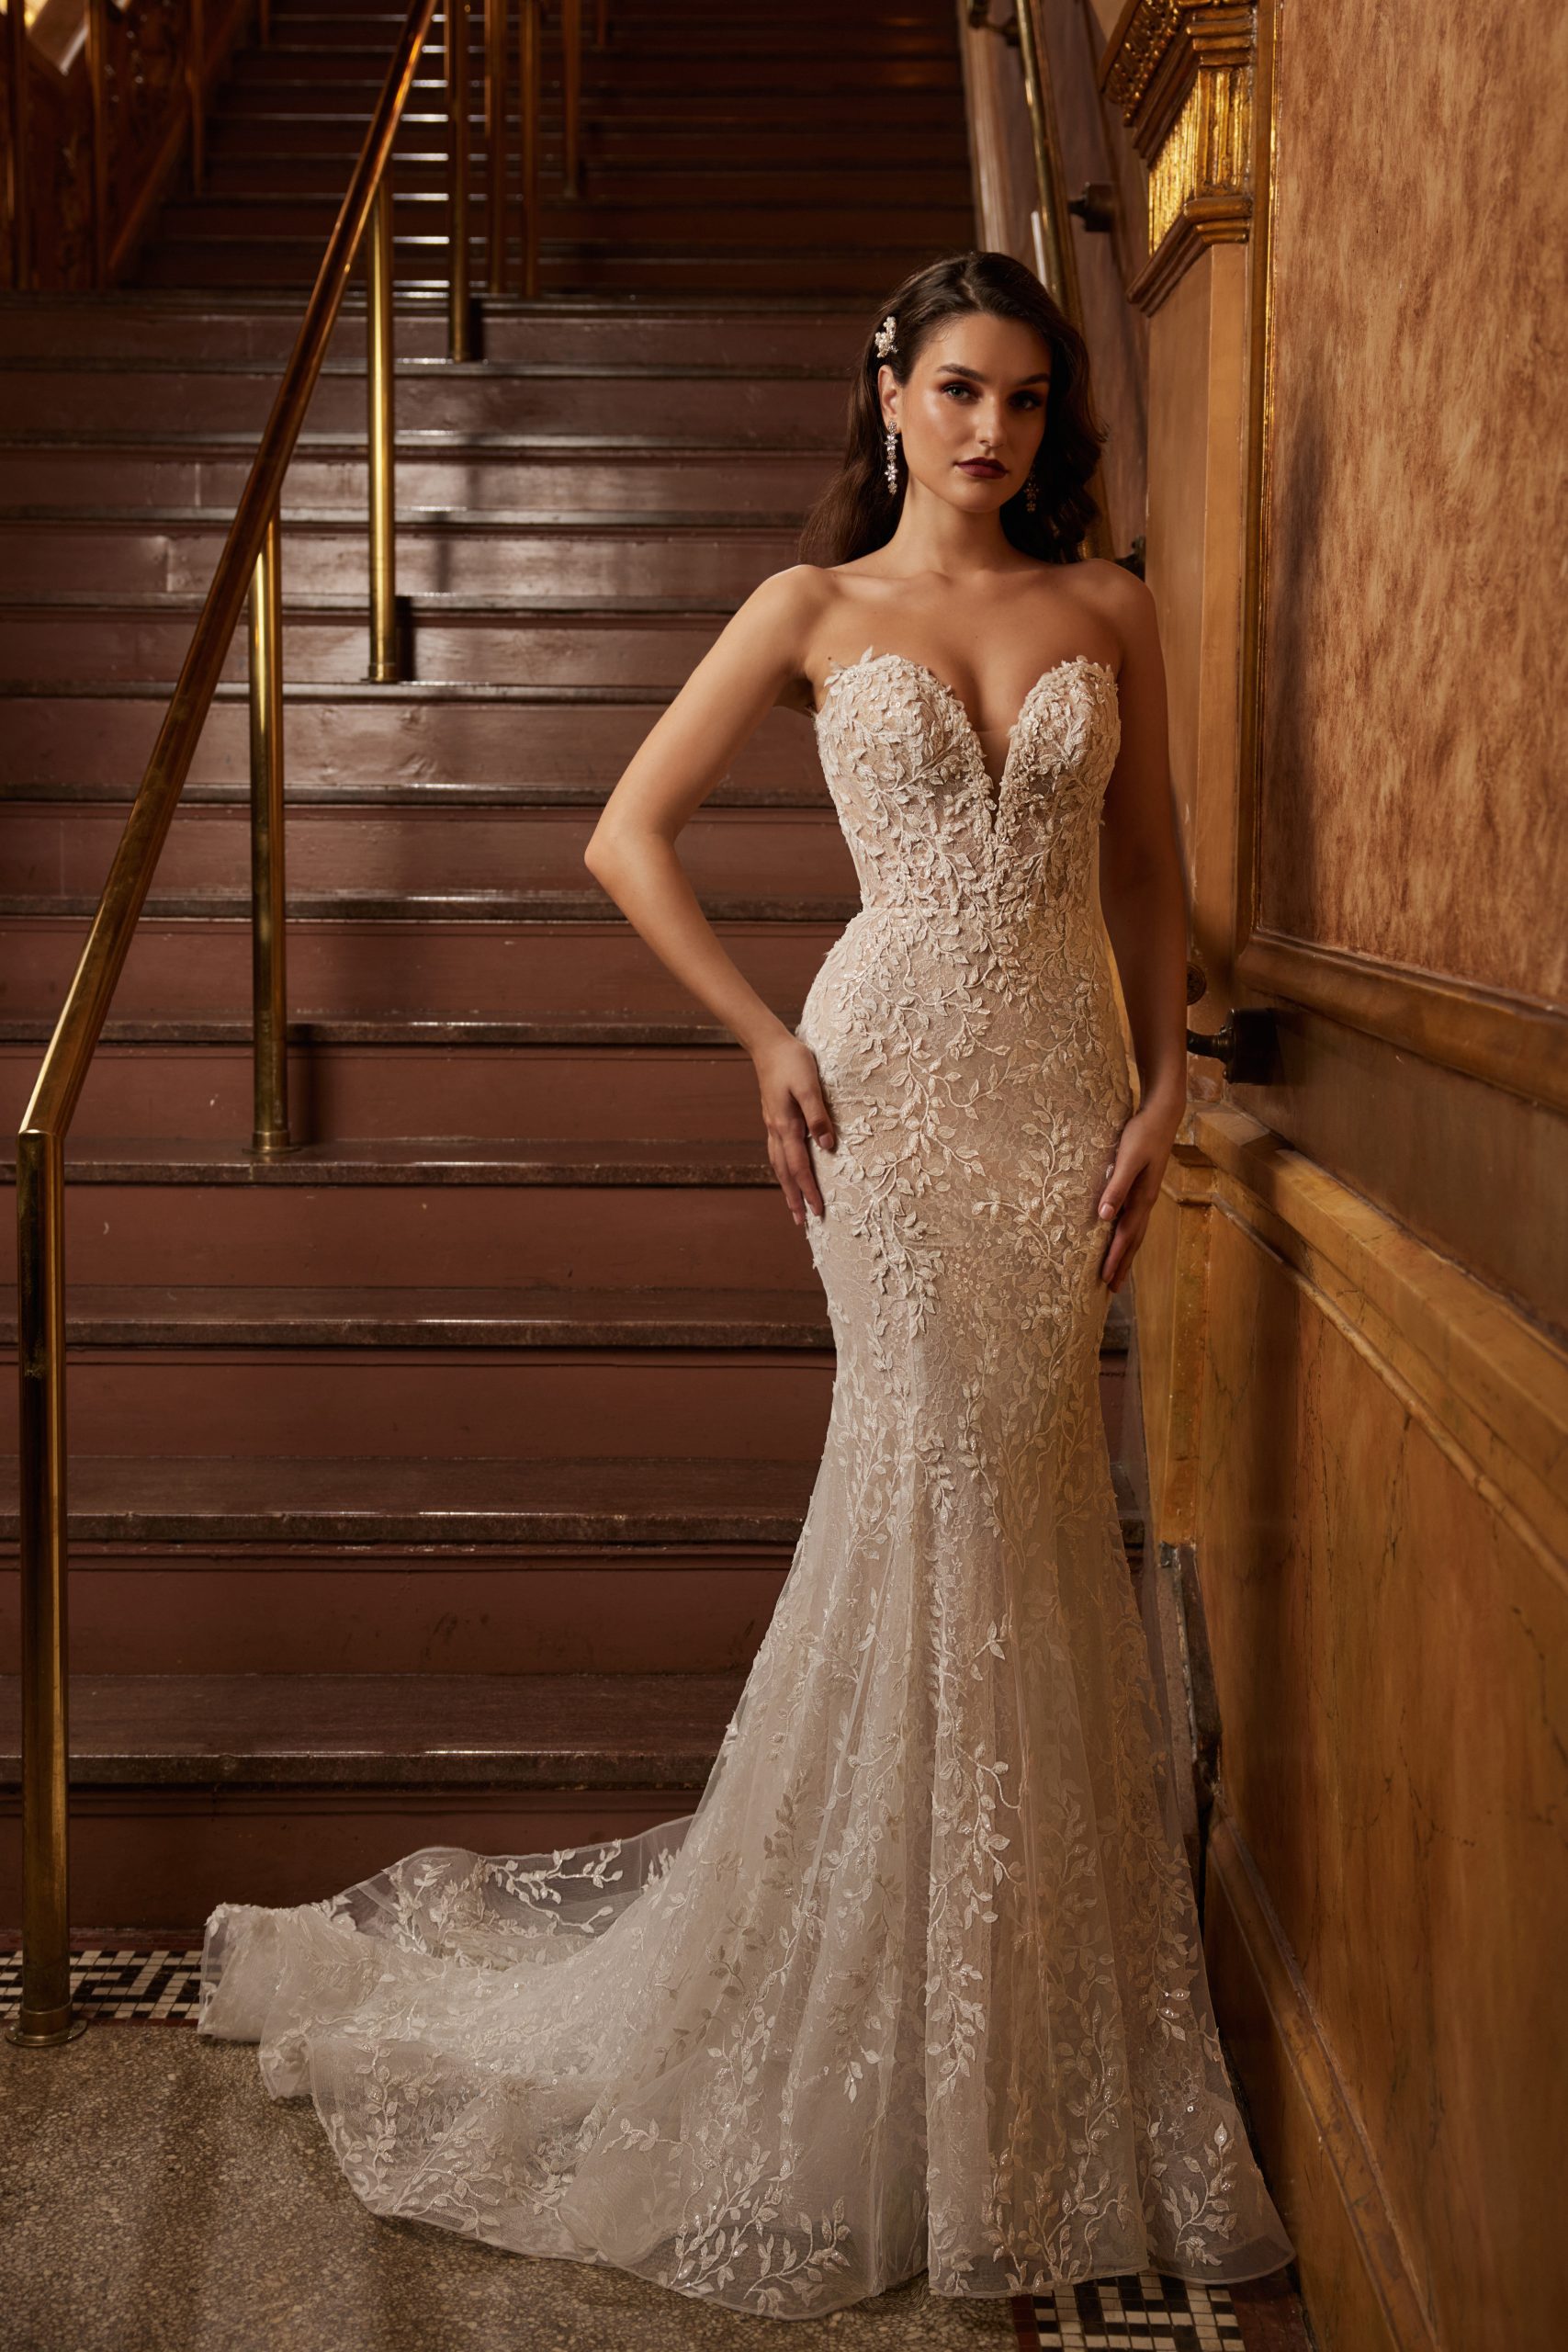 Mermaid Wedding Dress with Detachable Overskirt Beaded Lace Corset Bridal  Gowns